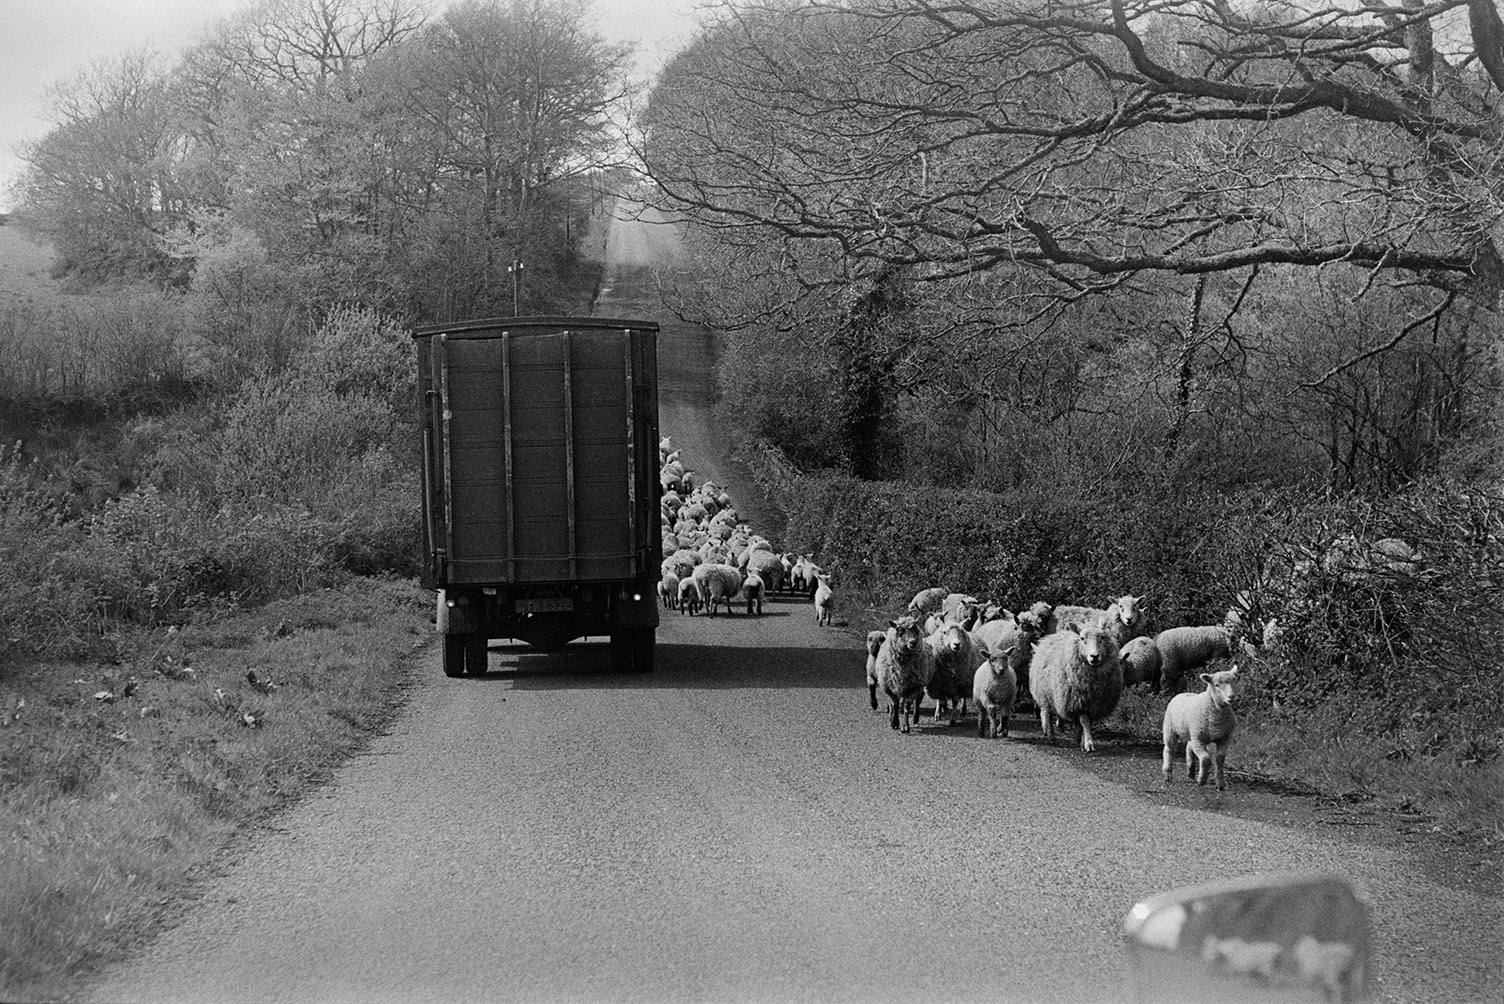 A lorry passing a flock of sheep being herded along a tree-lined road at Rackenford.